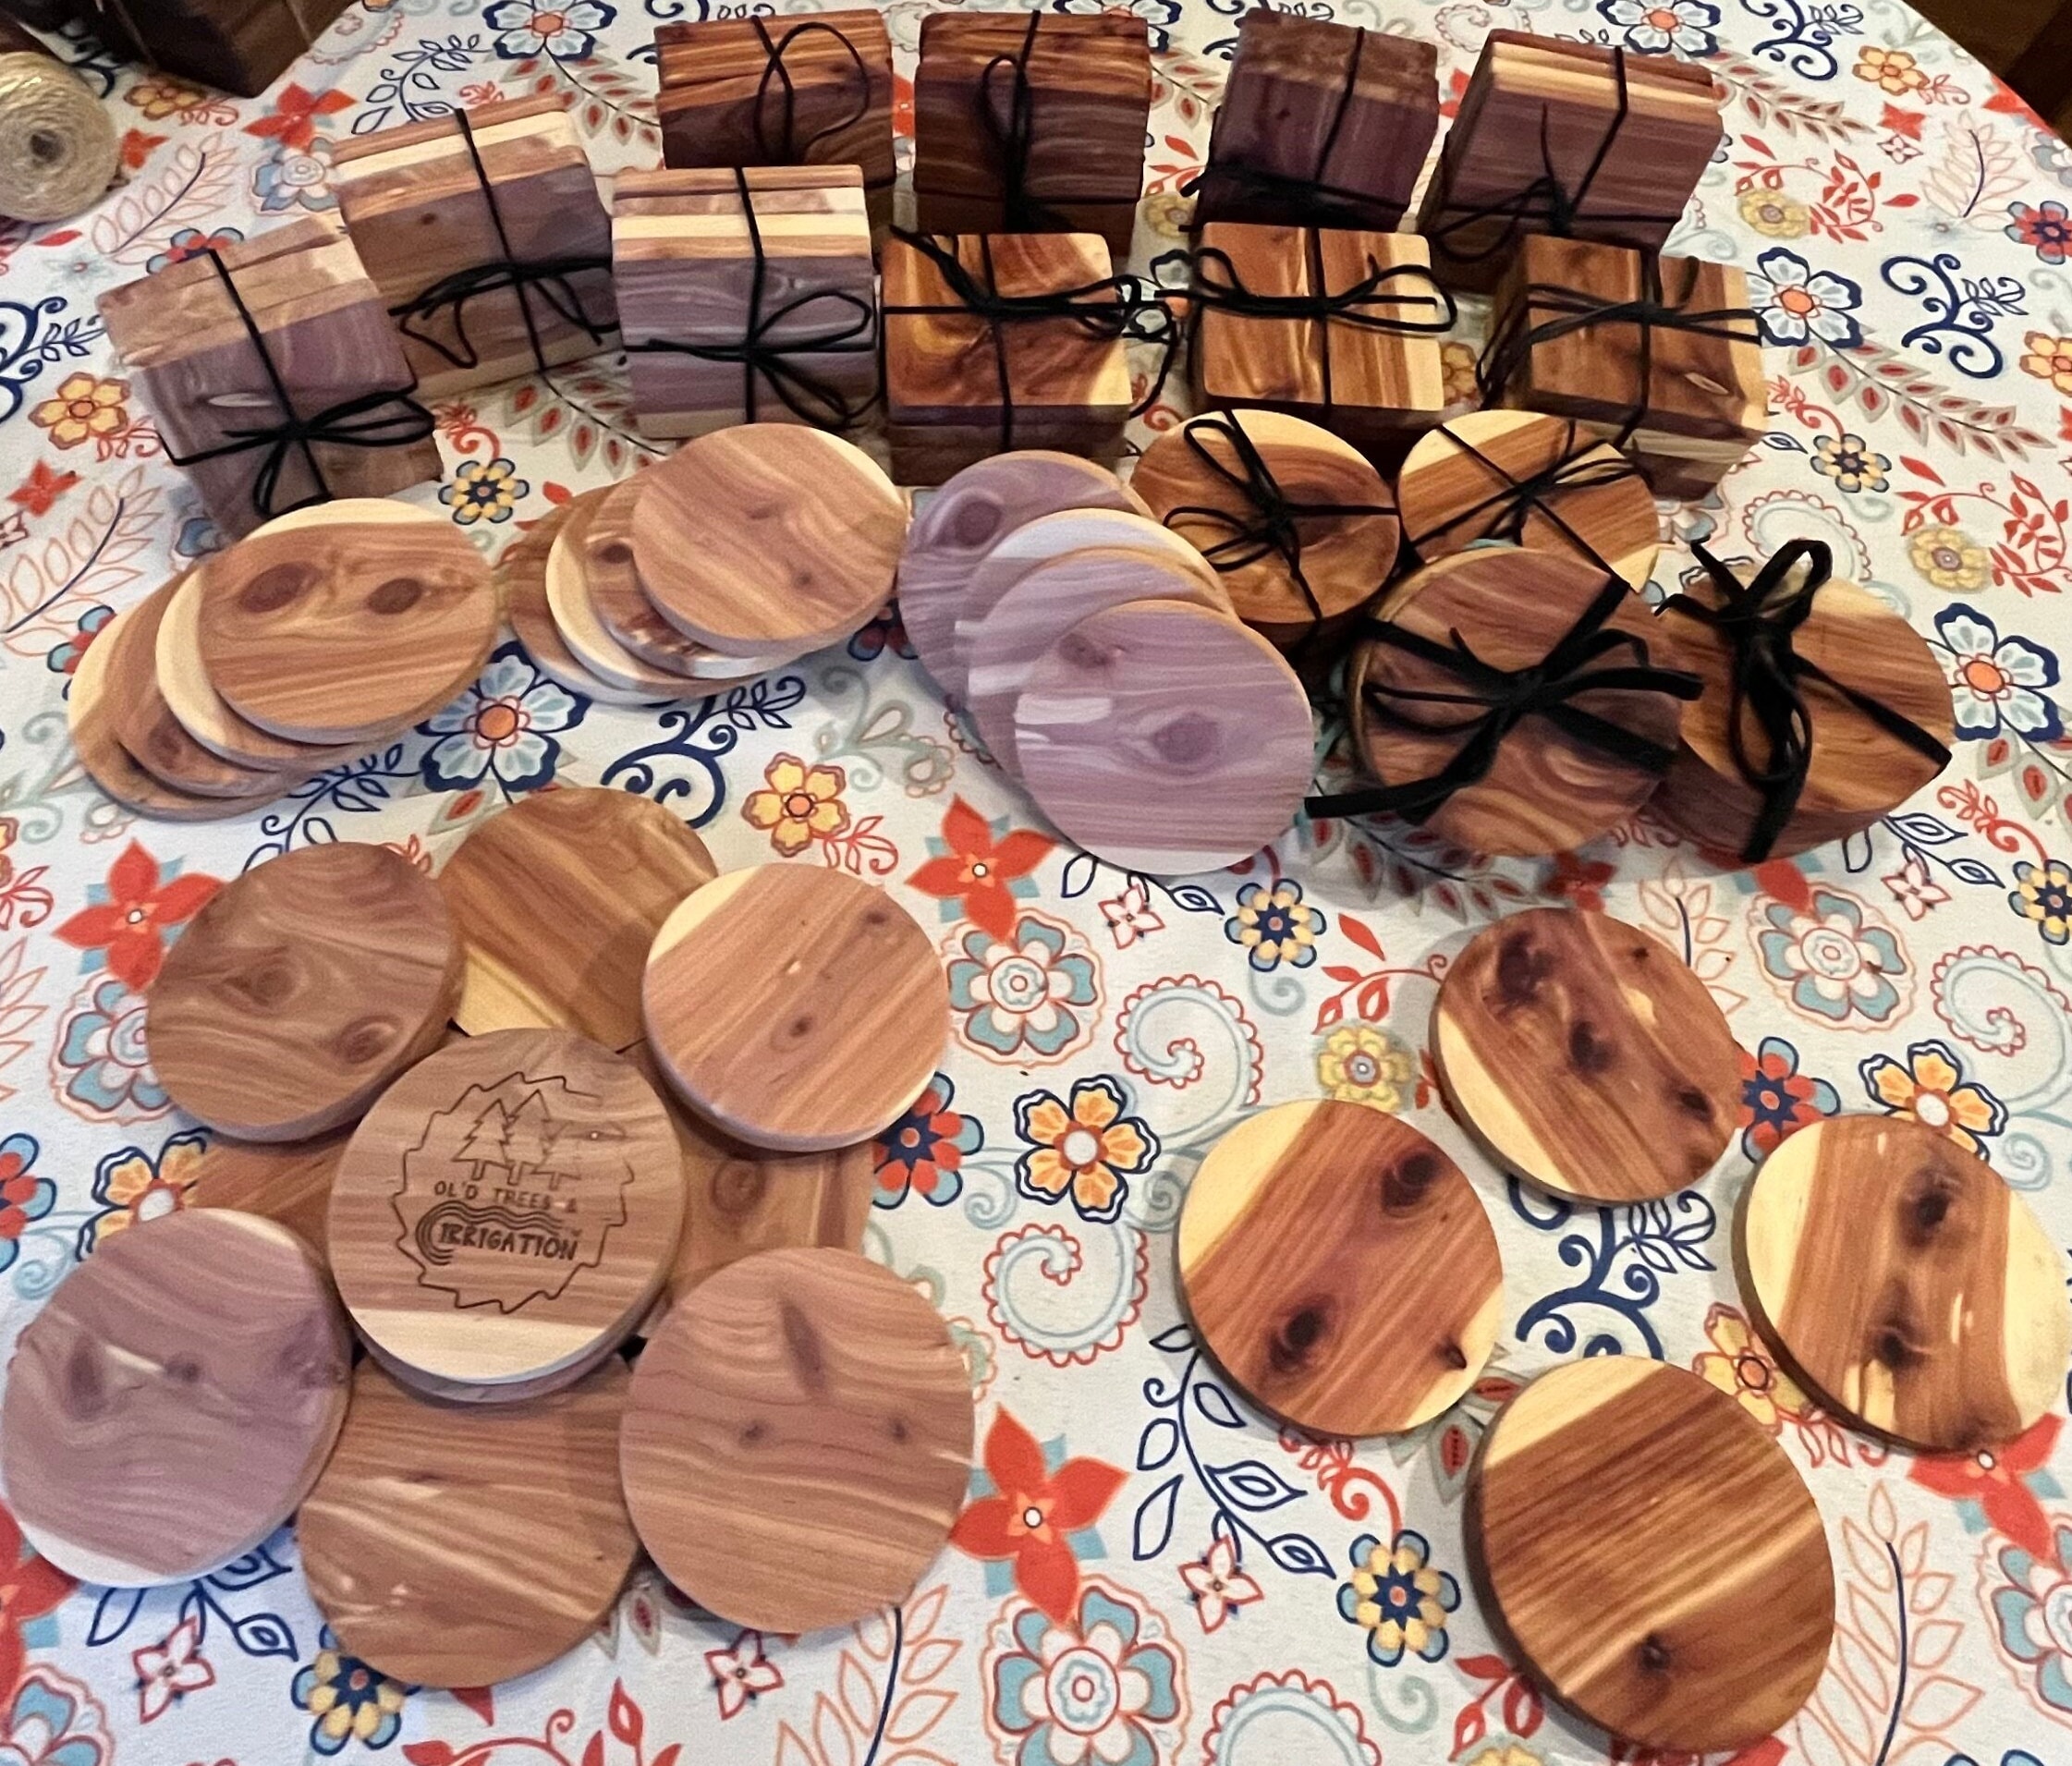 5 Pieces Unfinished Wood Coasters, 4 Inch Round Blank Wooden Coasters for  Crafts with Non-Slip Silicon Dots for DIY Stained Painting Wood Engraving  Home Decoration